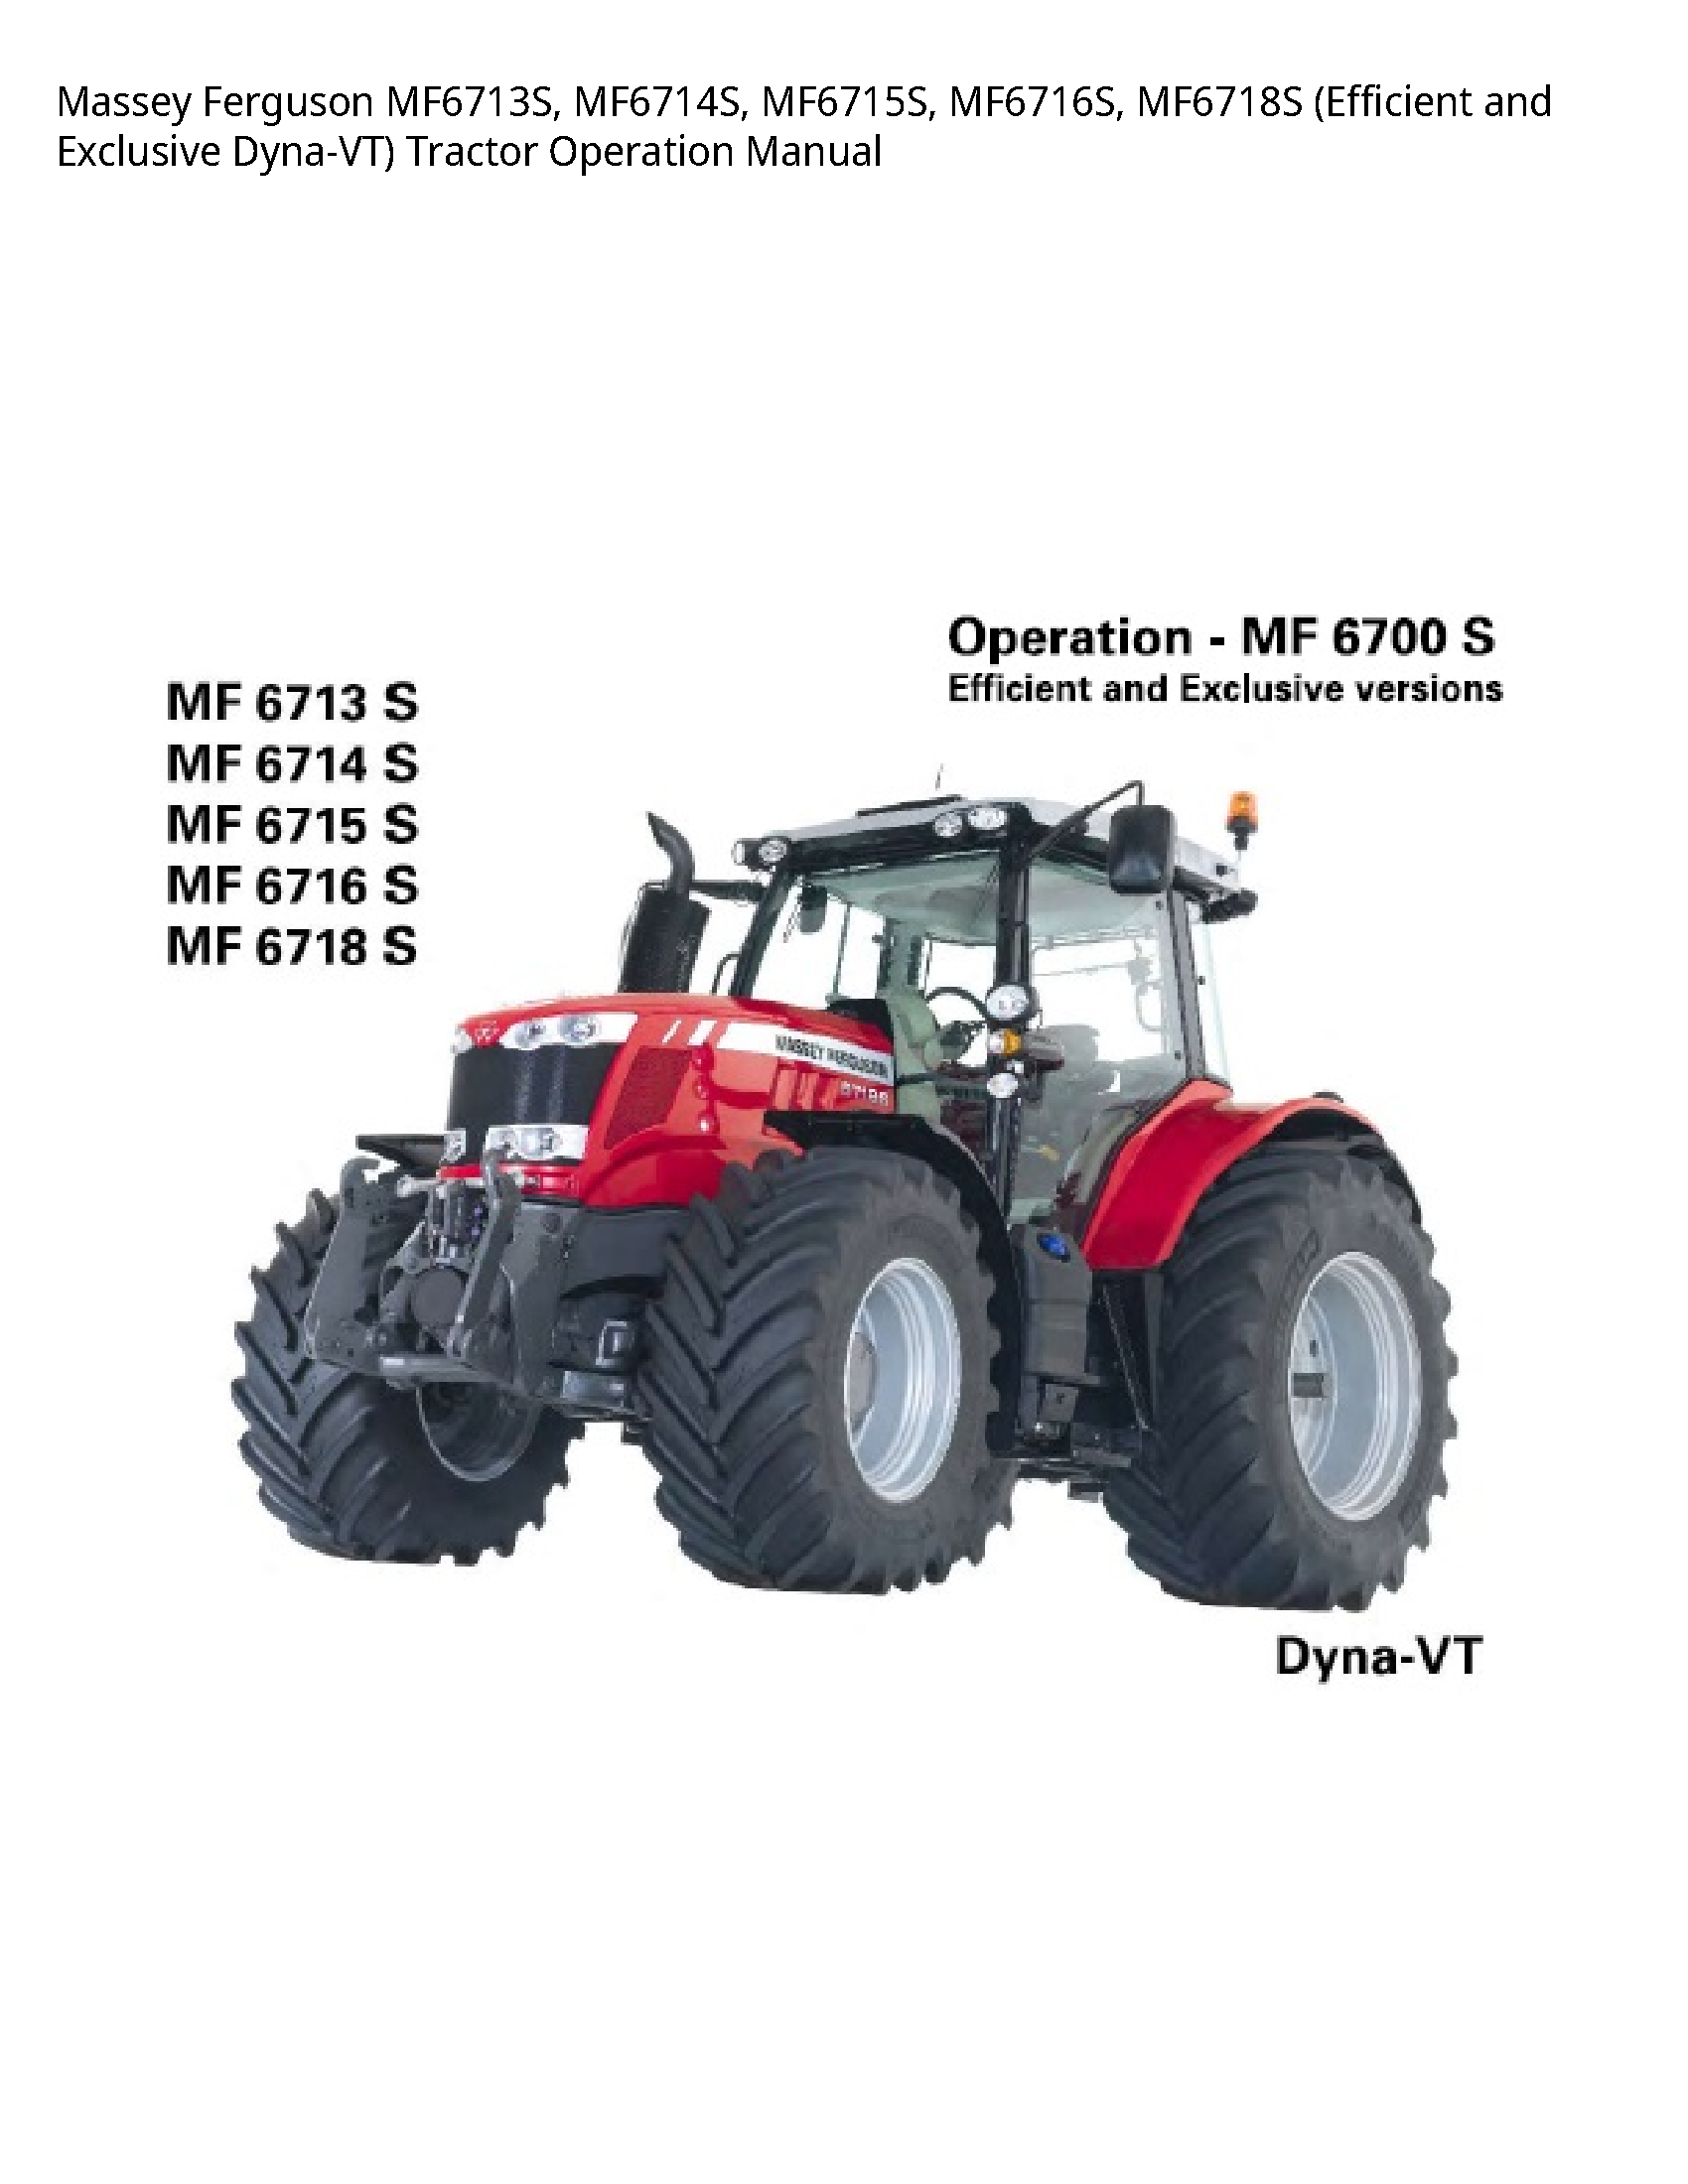 Massey Ferguson MF6713S (Efficient  Exclusive Dyna-VT) Tractor Operation manual